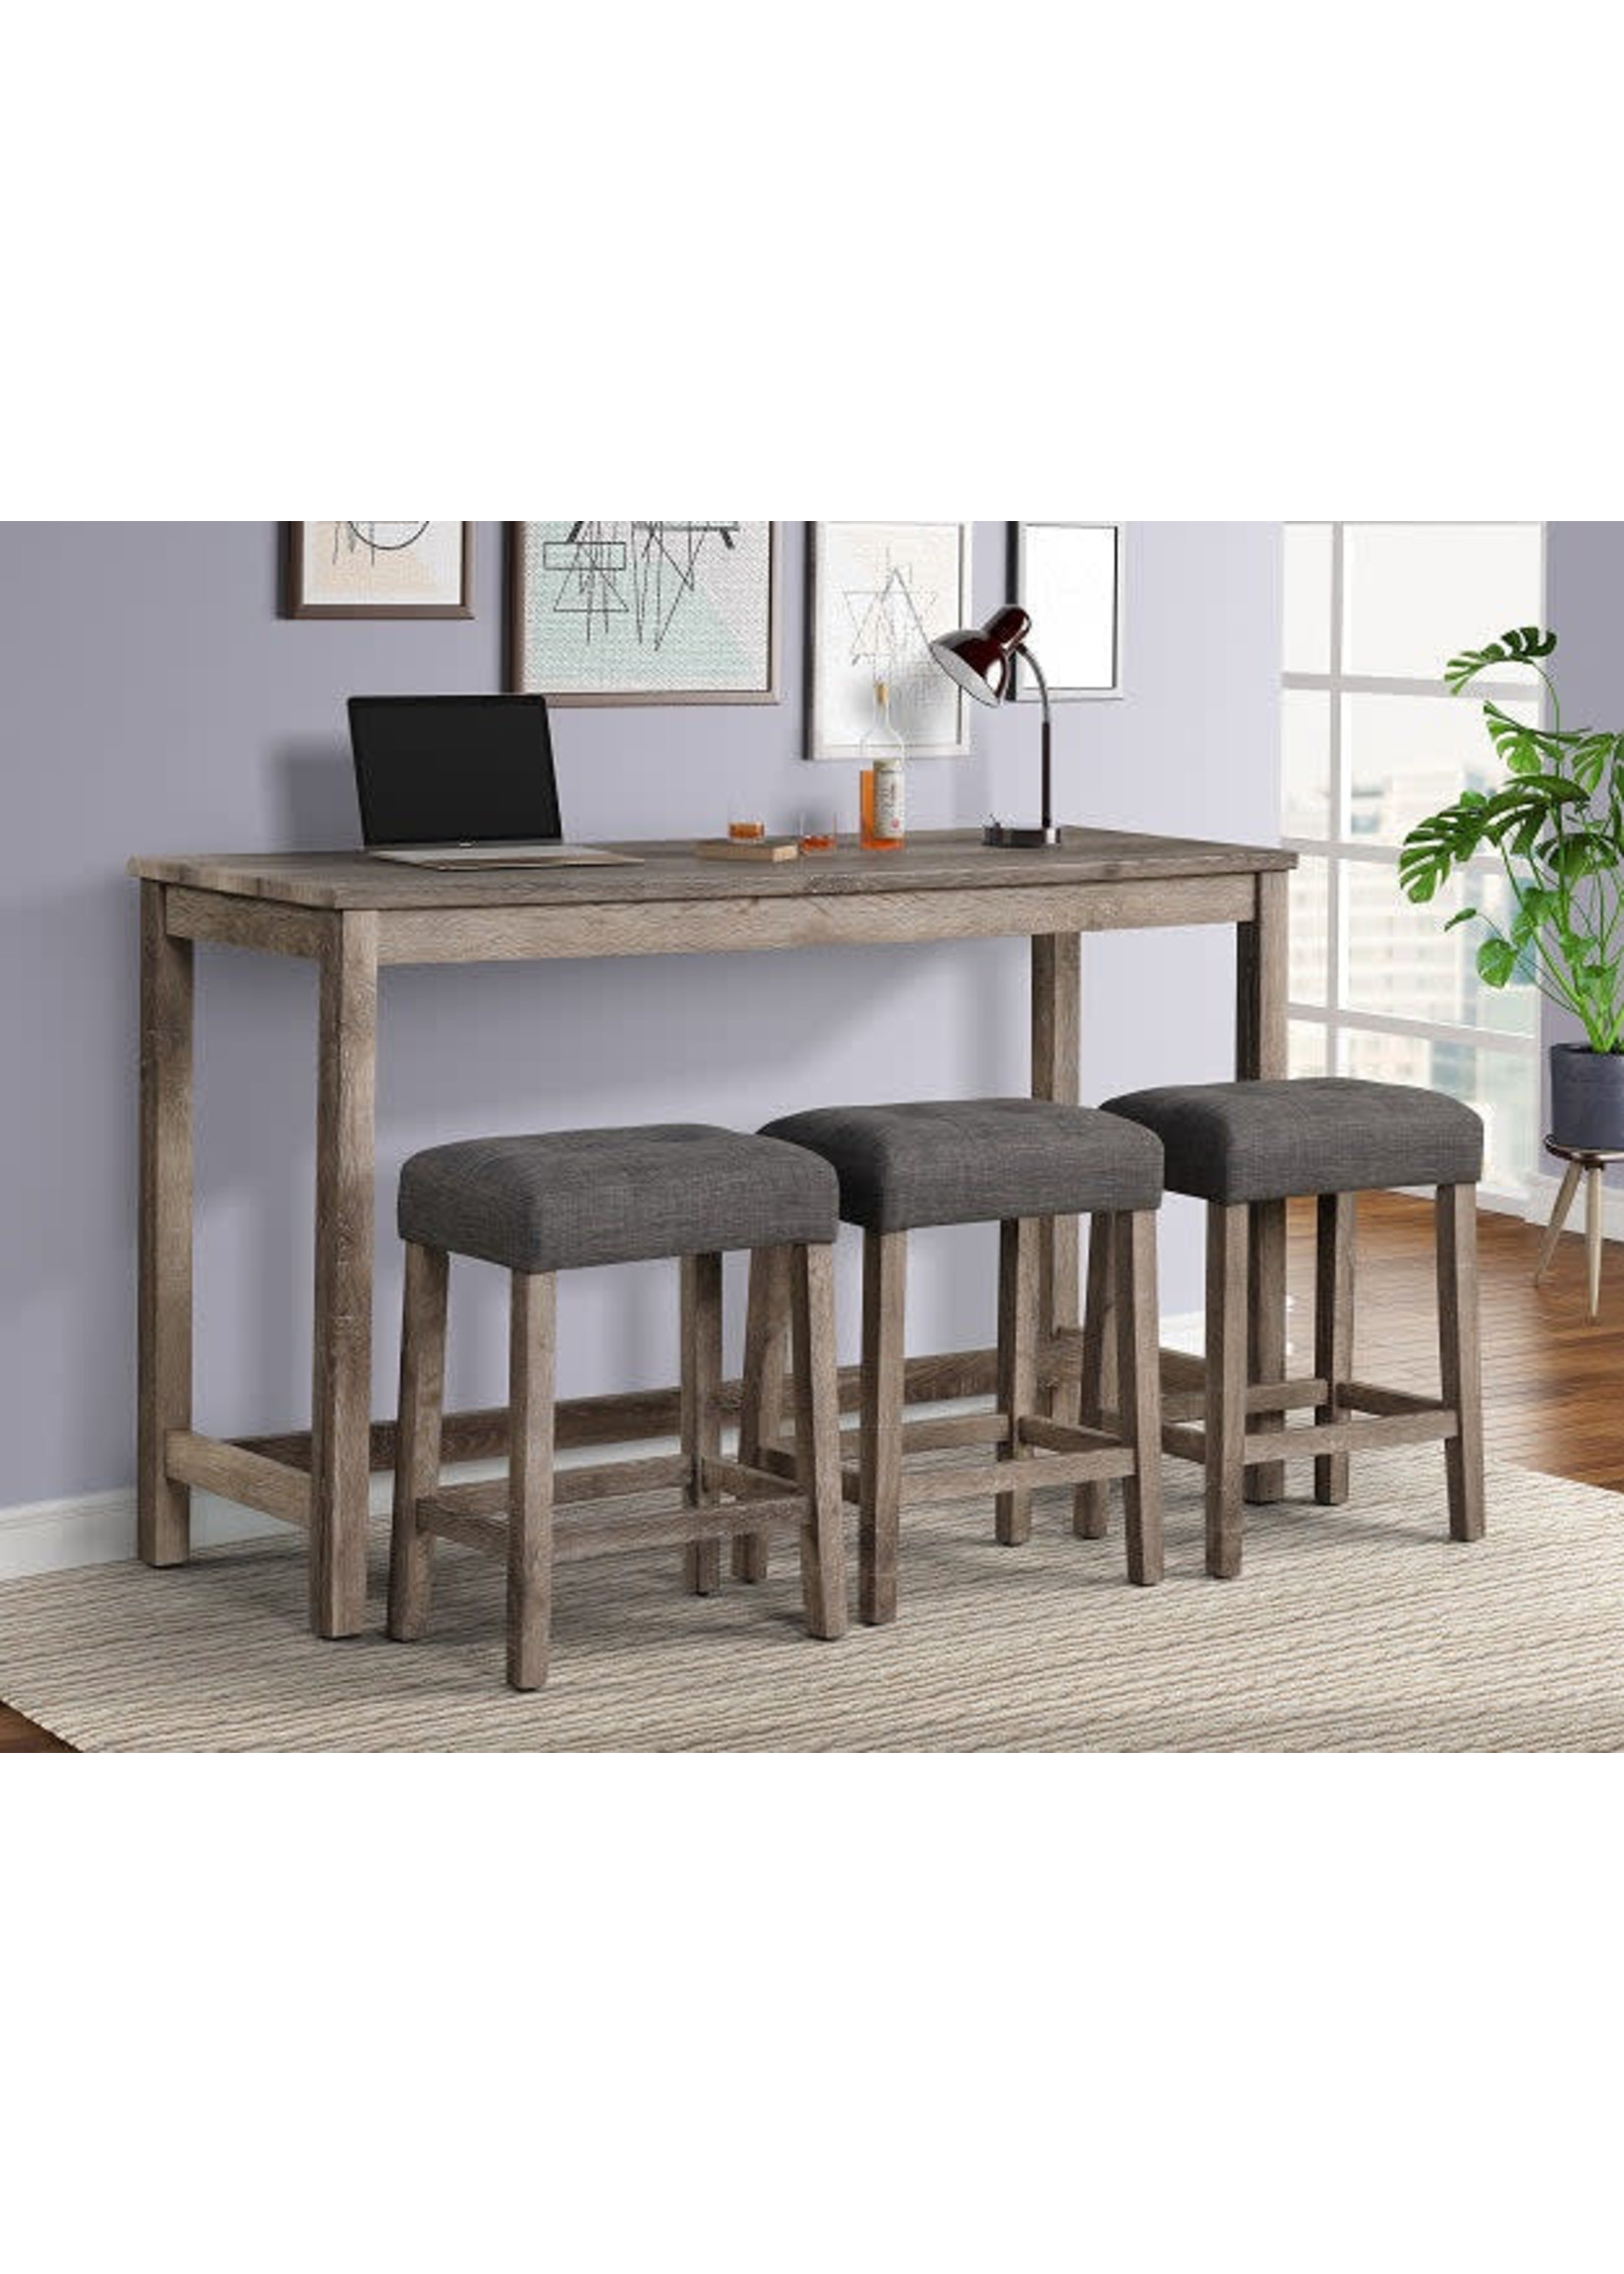 CROWNMARK 3714SET CONSOLE TABLE & 3 STOOLS WREN GREY